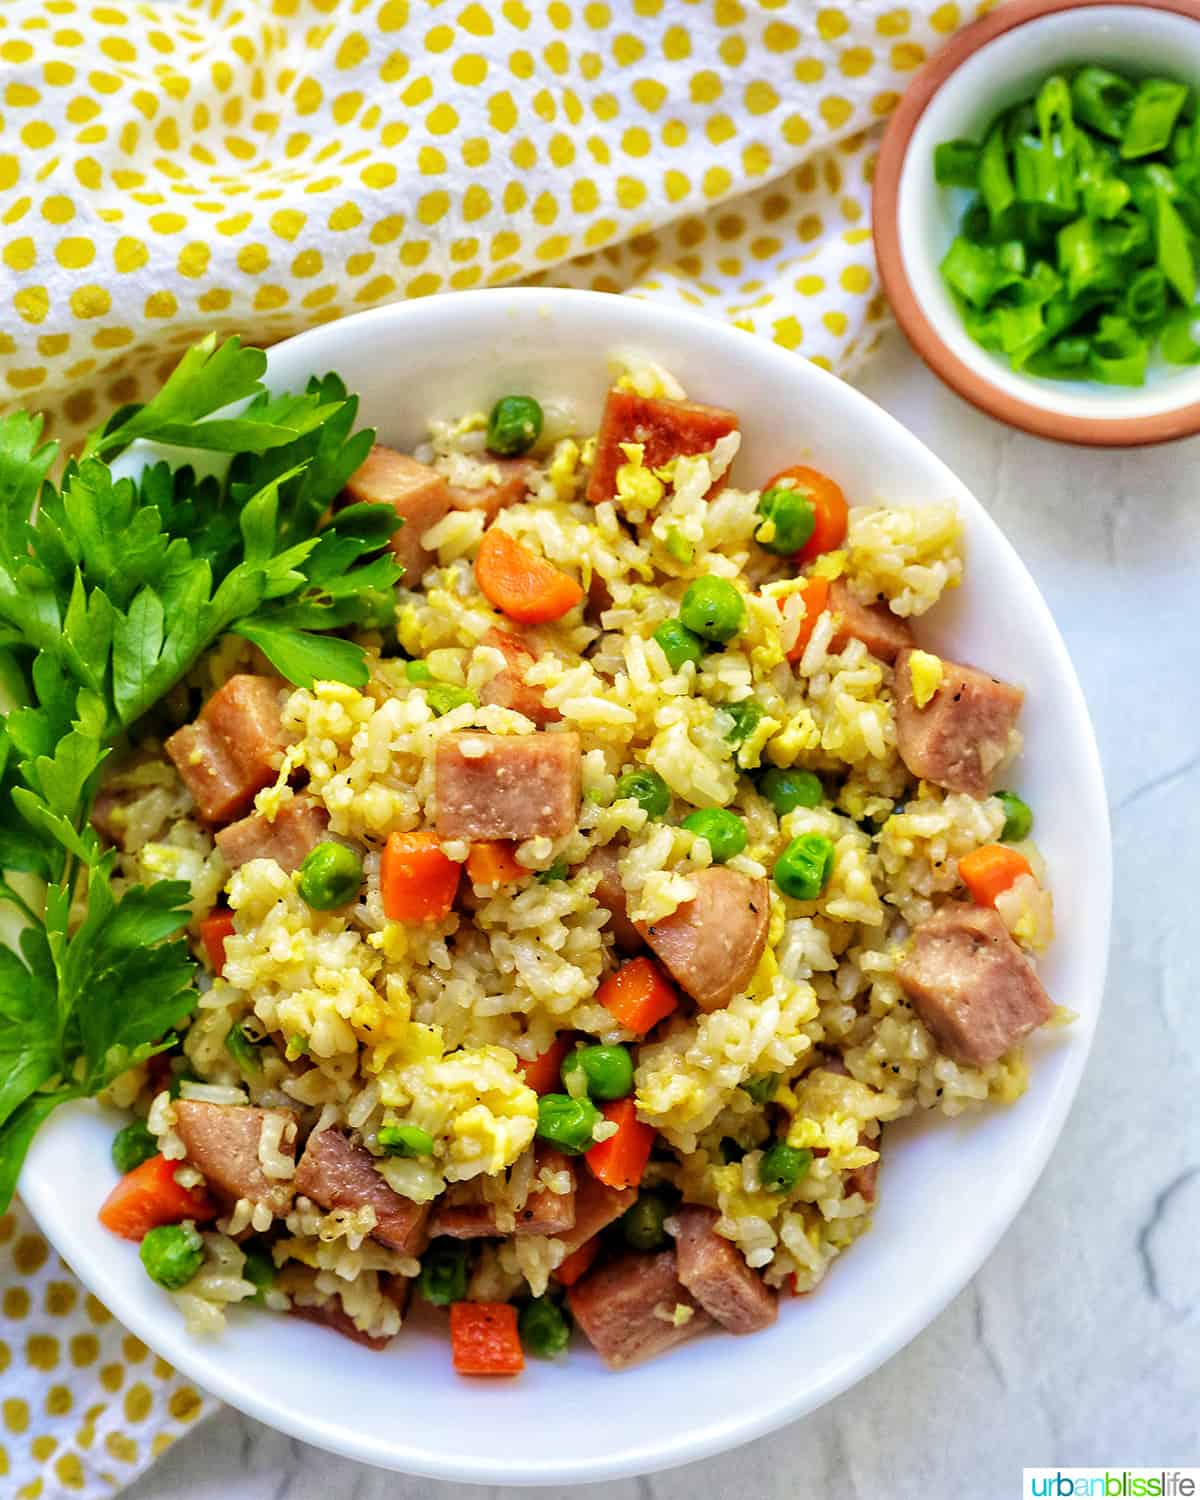 spam fried rice with peas, carrots, and parsley garnish in a white bowl.